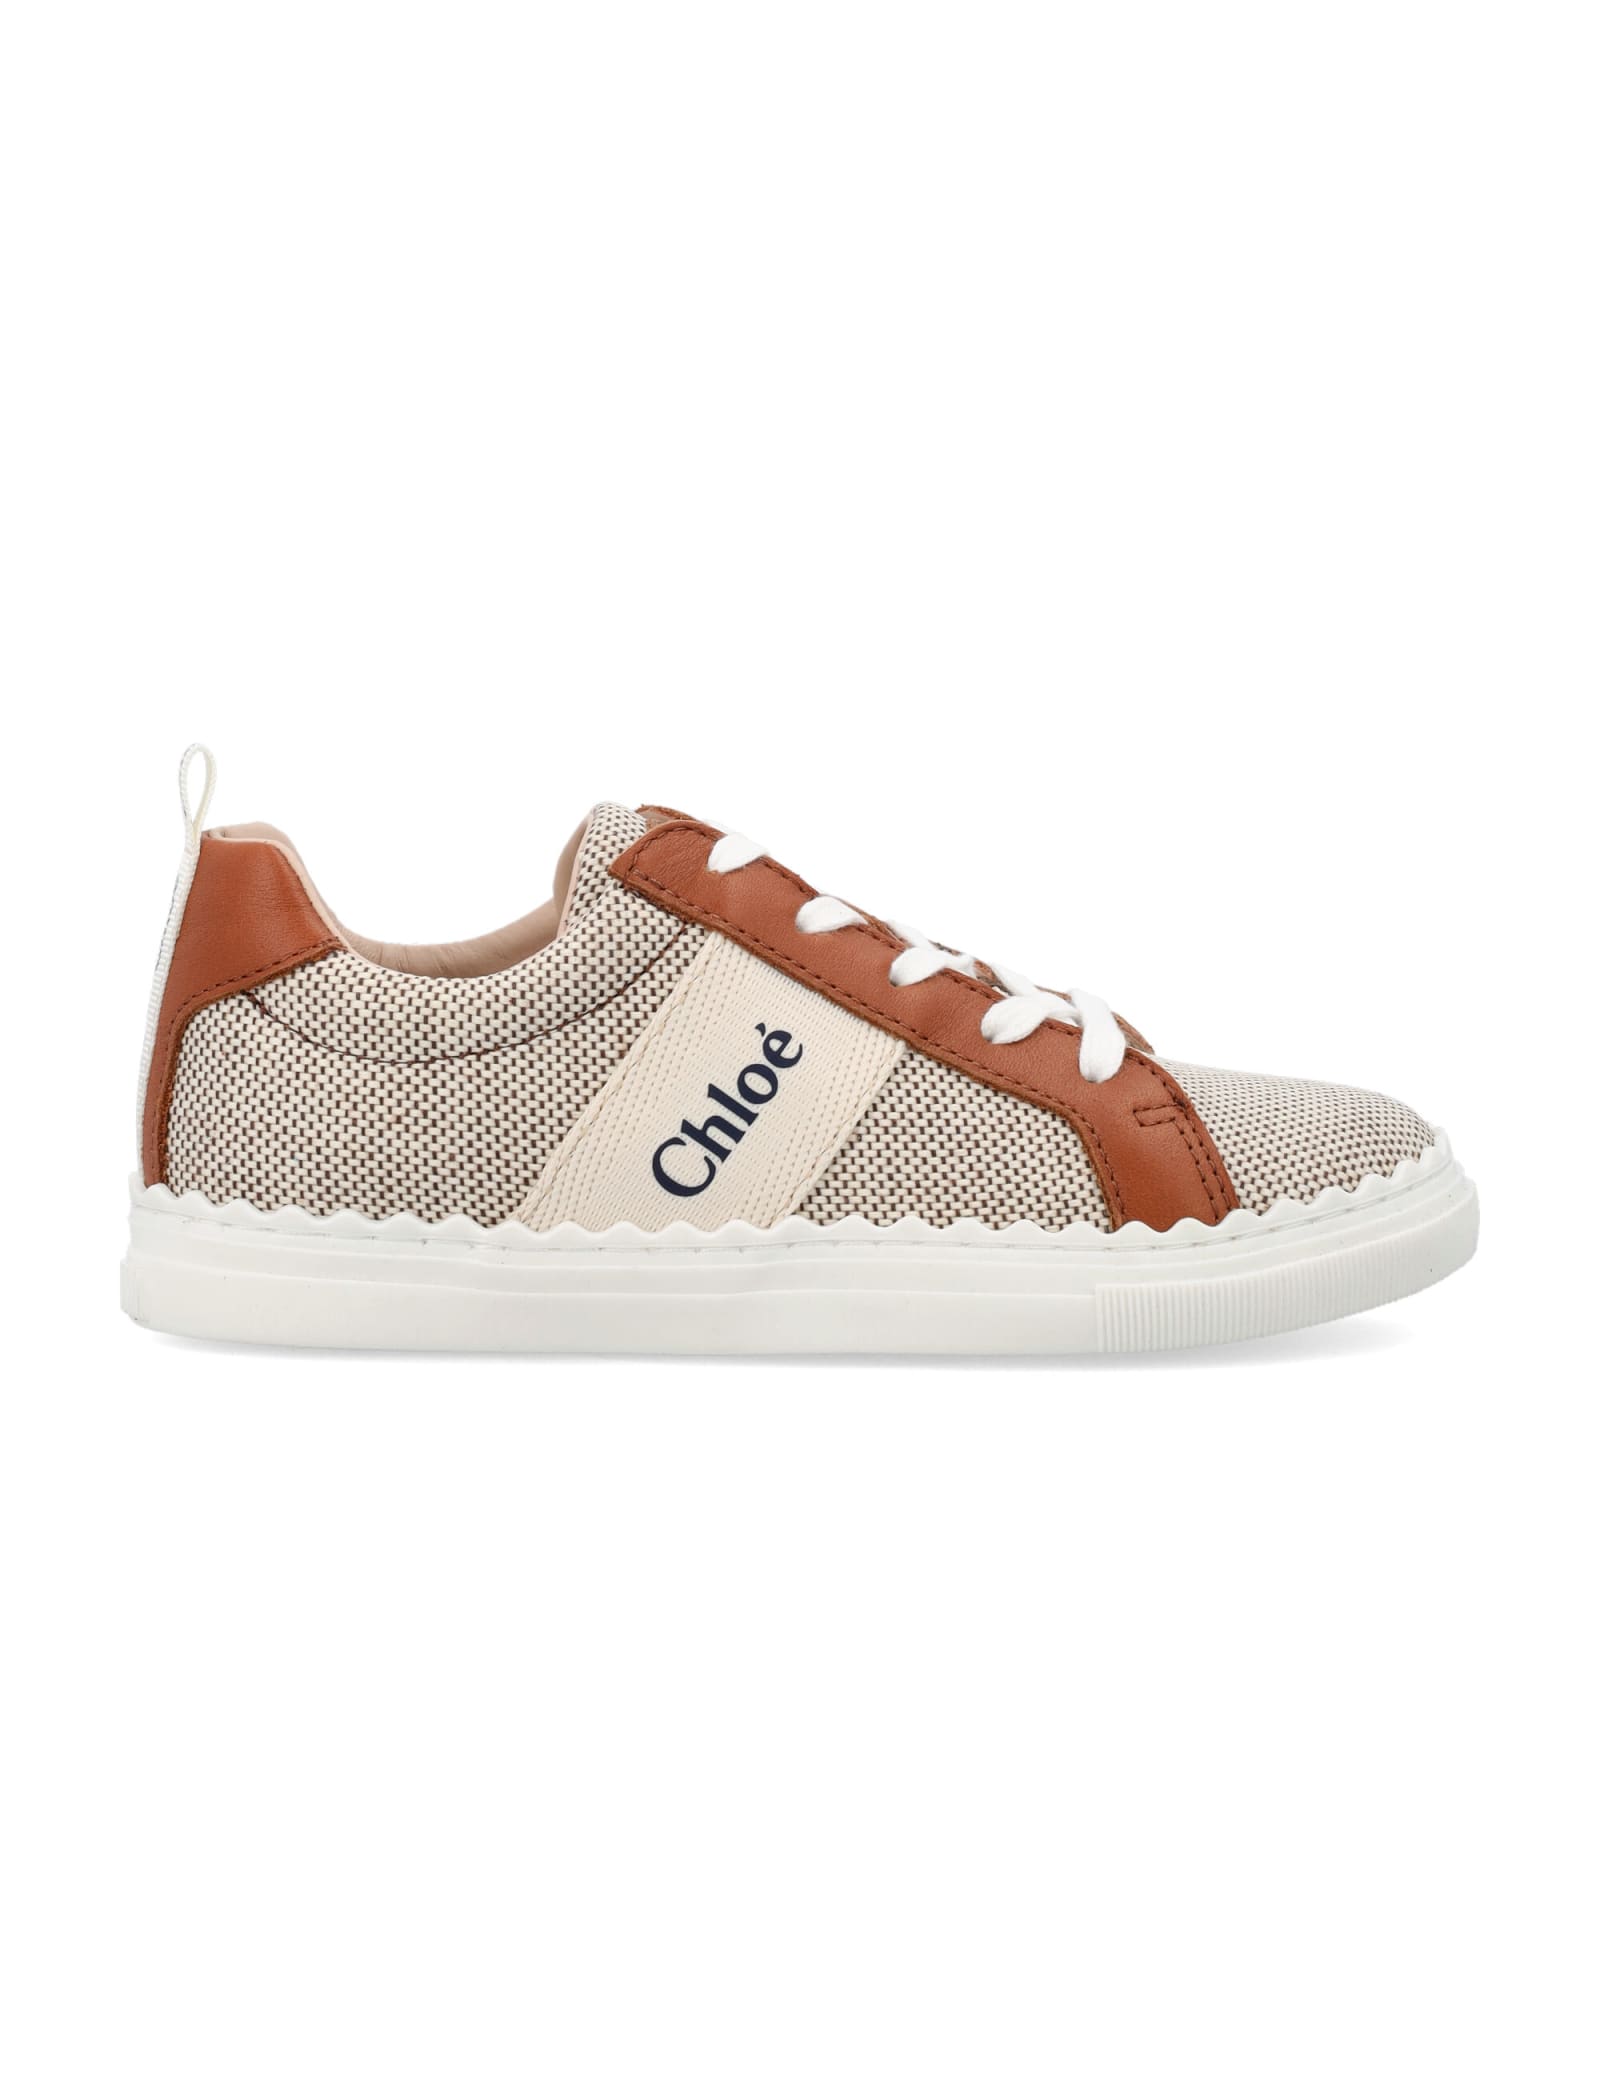 Chloé Fabric And Leather Sneakers